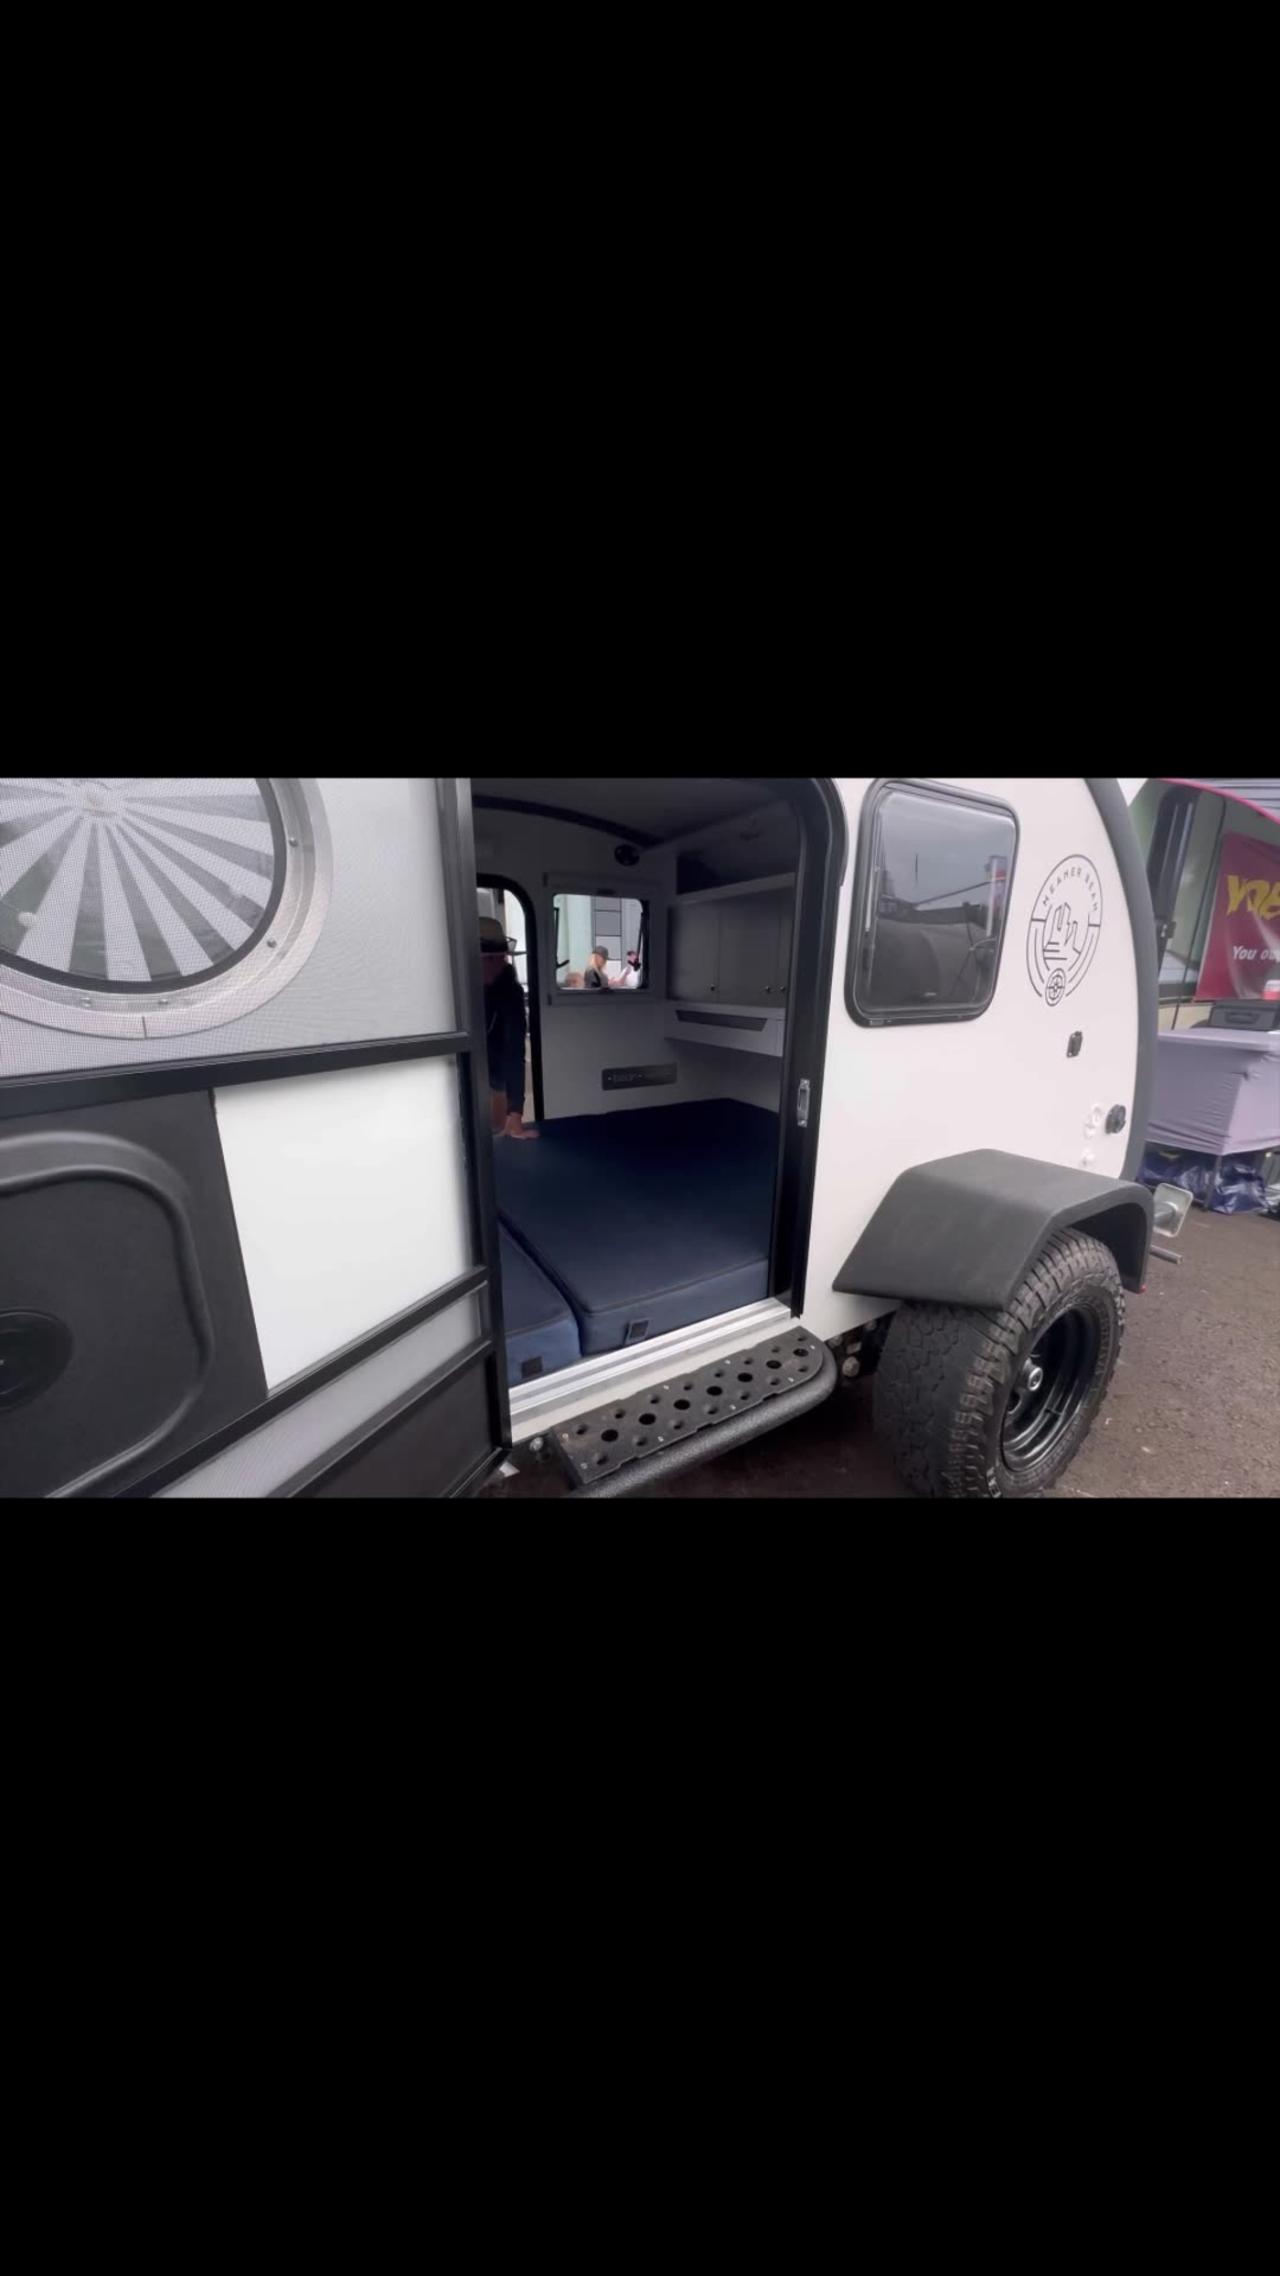 Ultimate adventure trailers? And an amazing concept camper the bean squared!